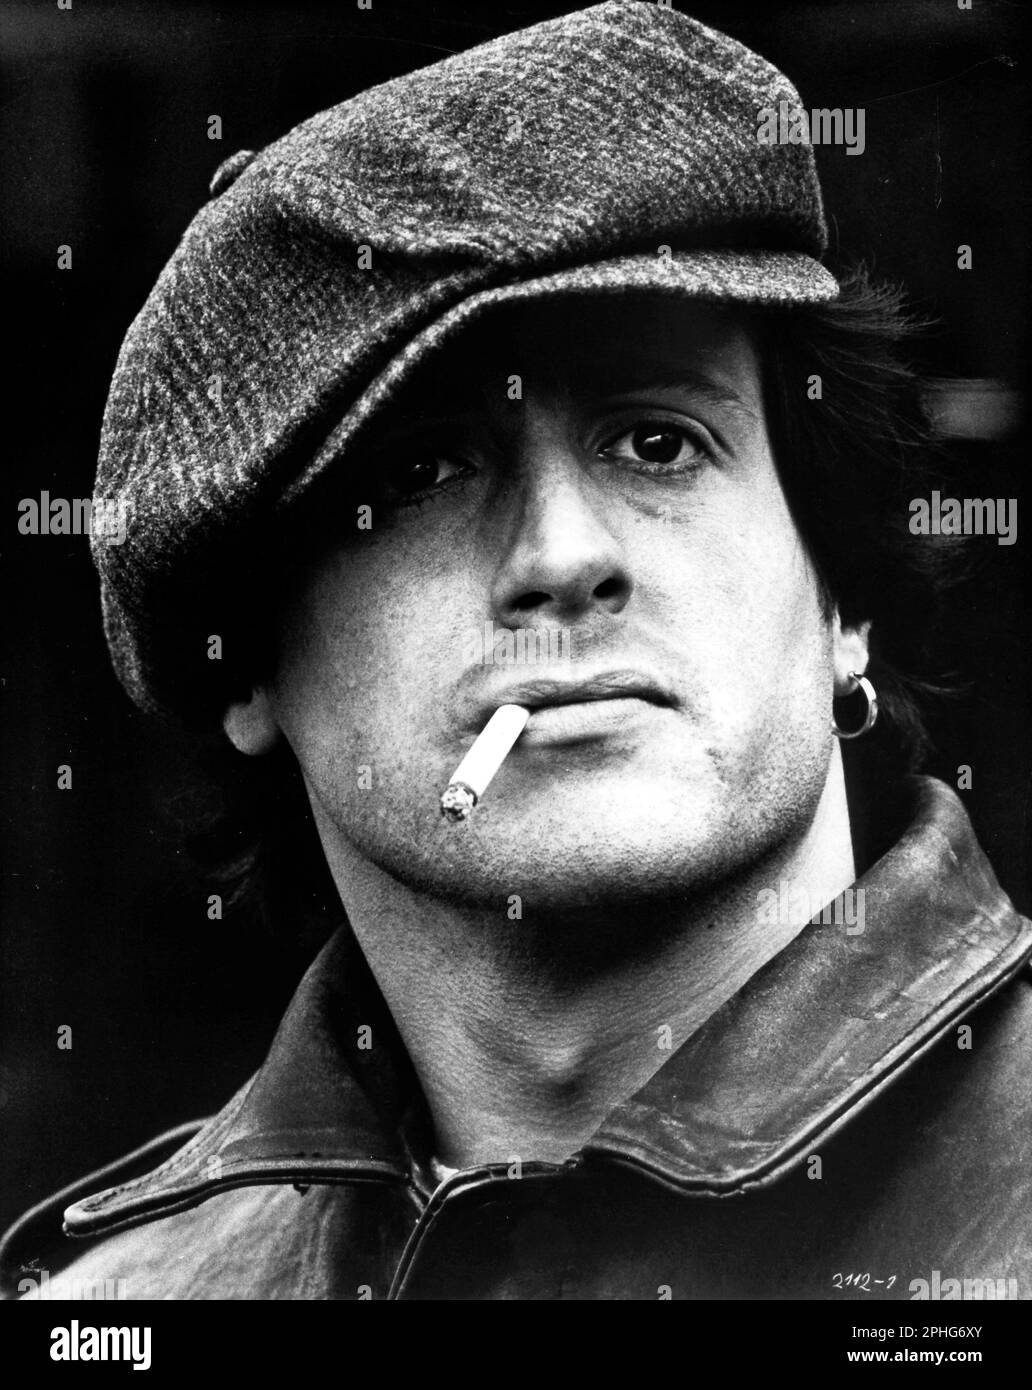 SYLVESTER STALLONE in PARADISE ALLEY (1978), directed by SYLVESTER STALLONE. Credit: UNIVERSAL PICTURES / Album Stock Photo